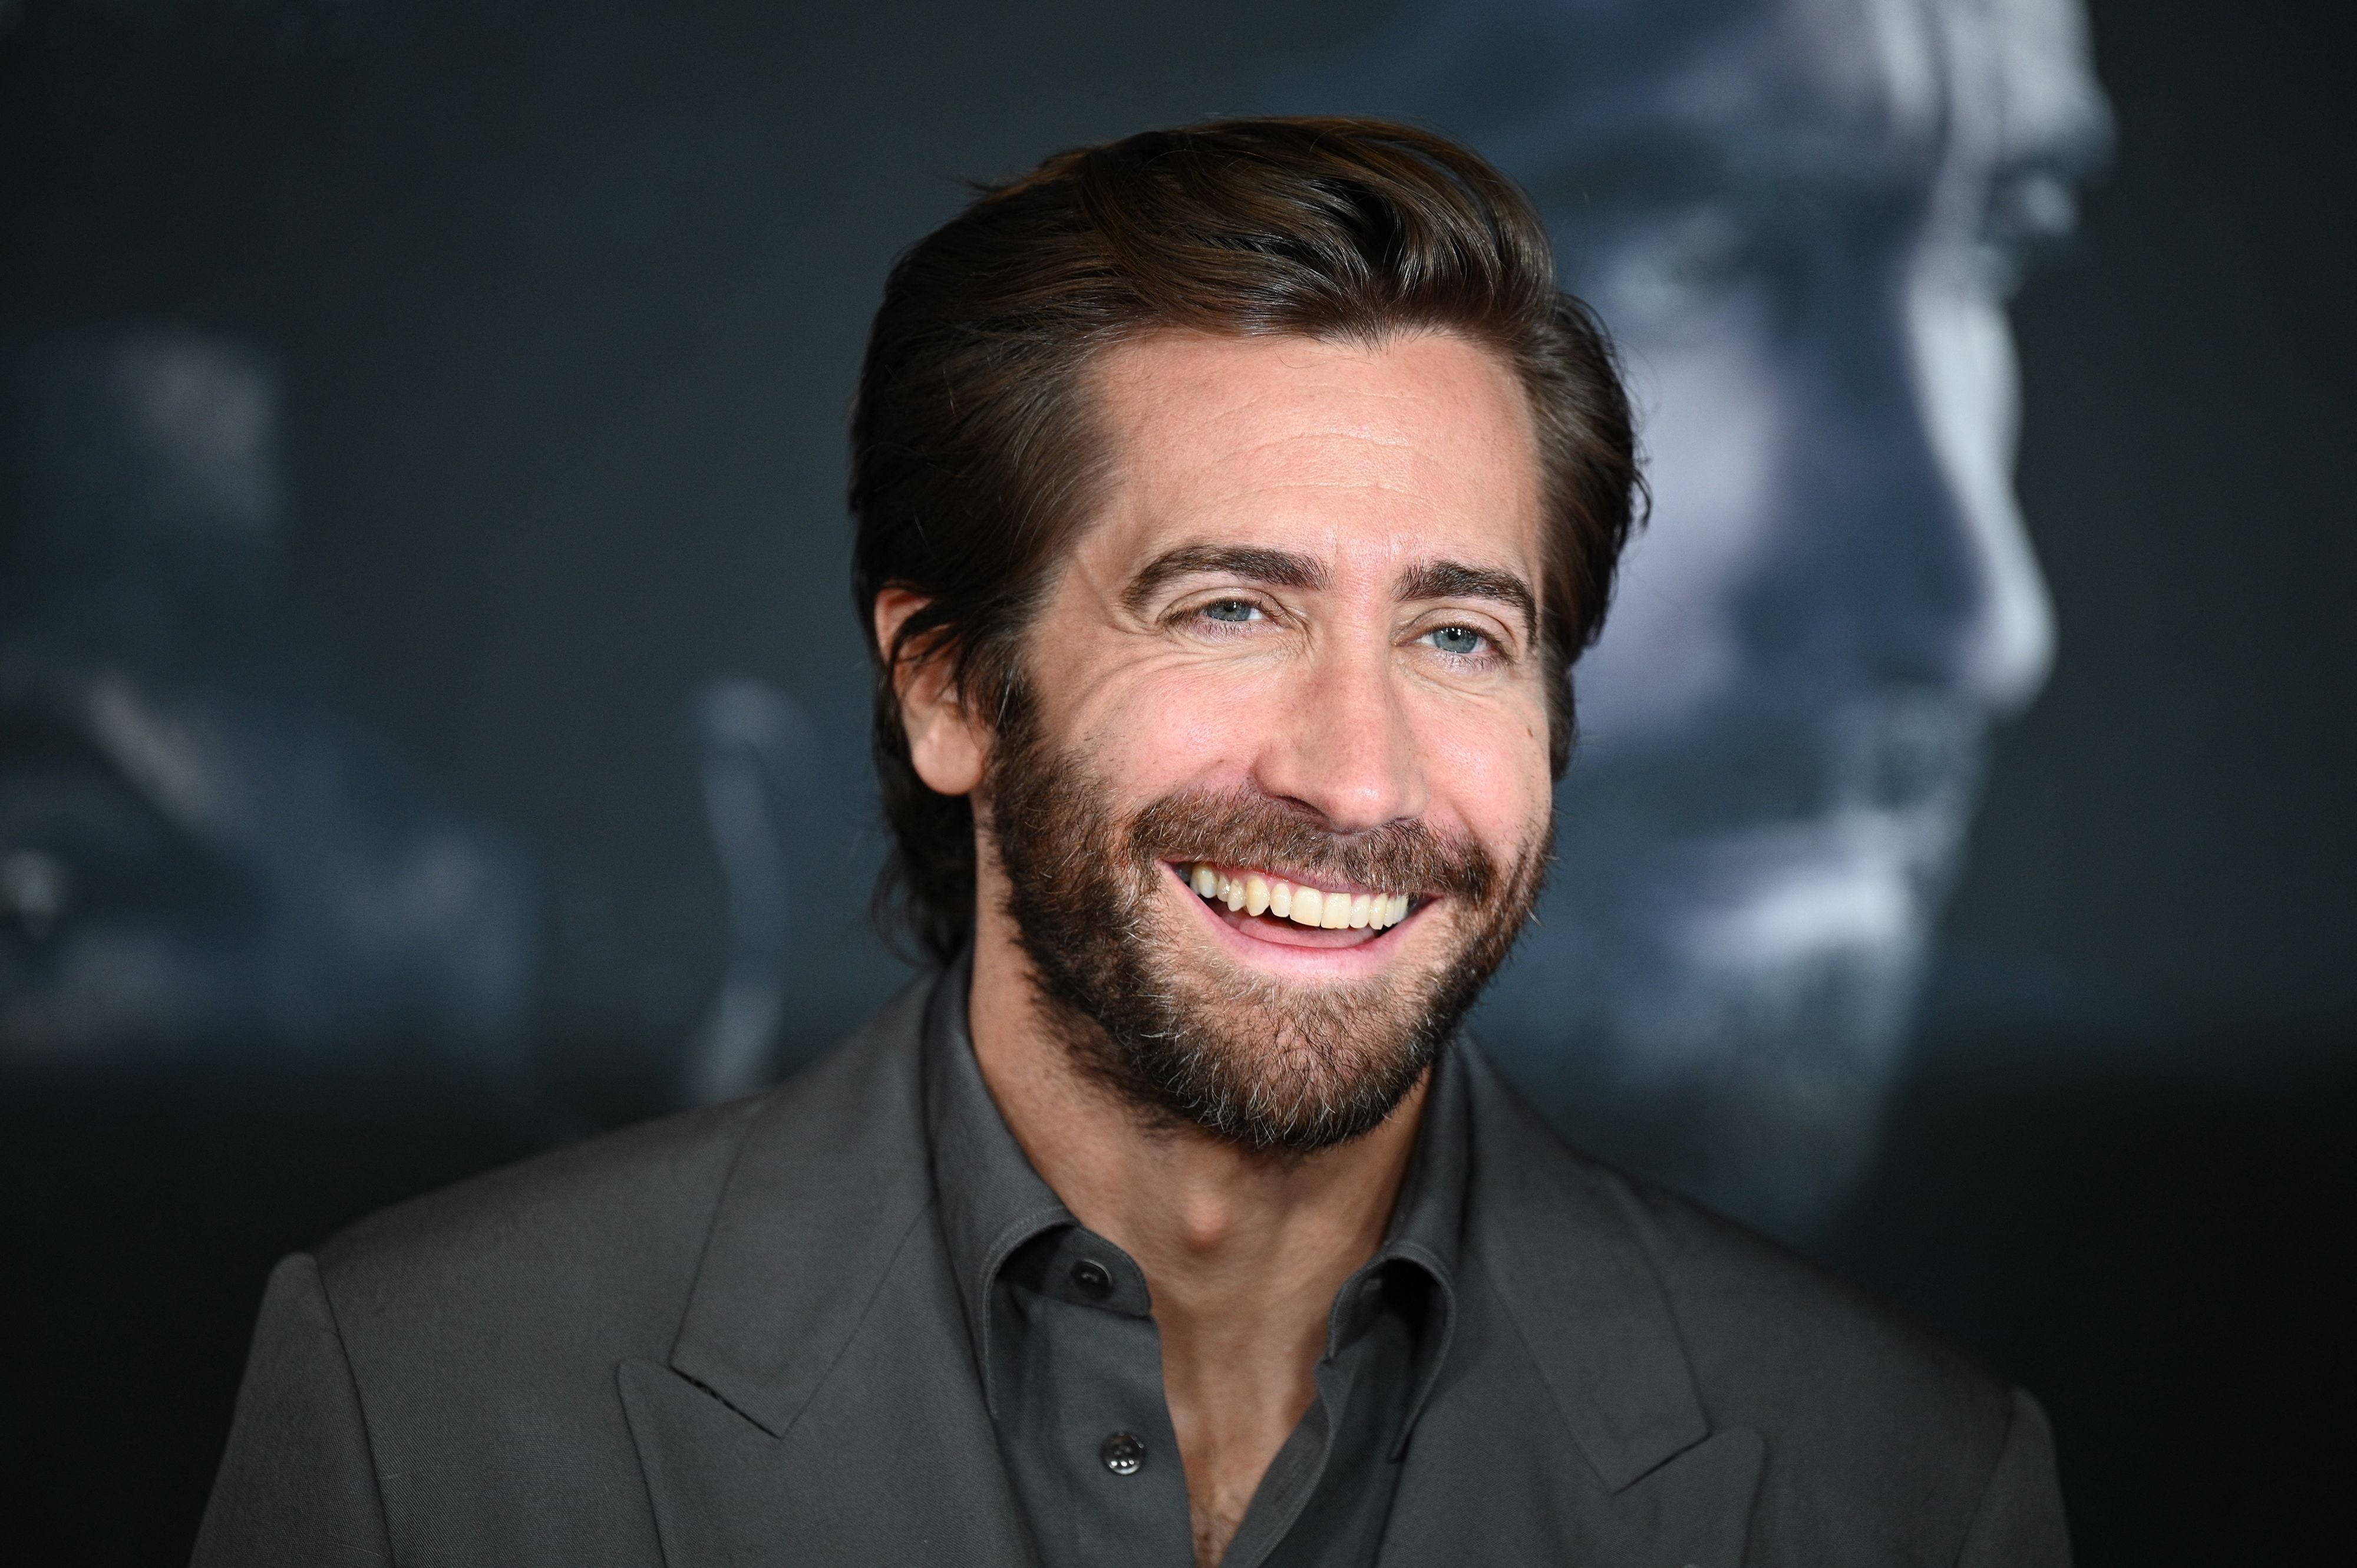 Jake Gyllenhaal was in the running for a role in ‘The Lord of the Rings’